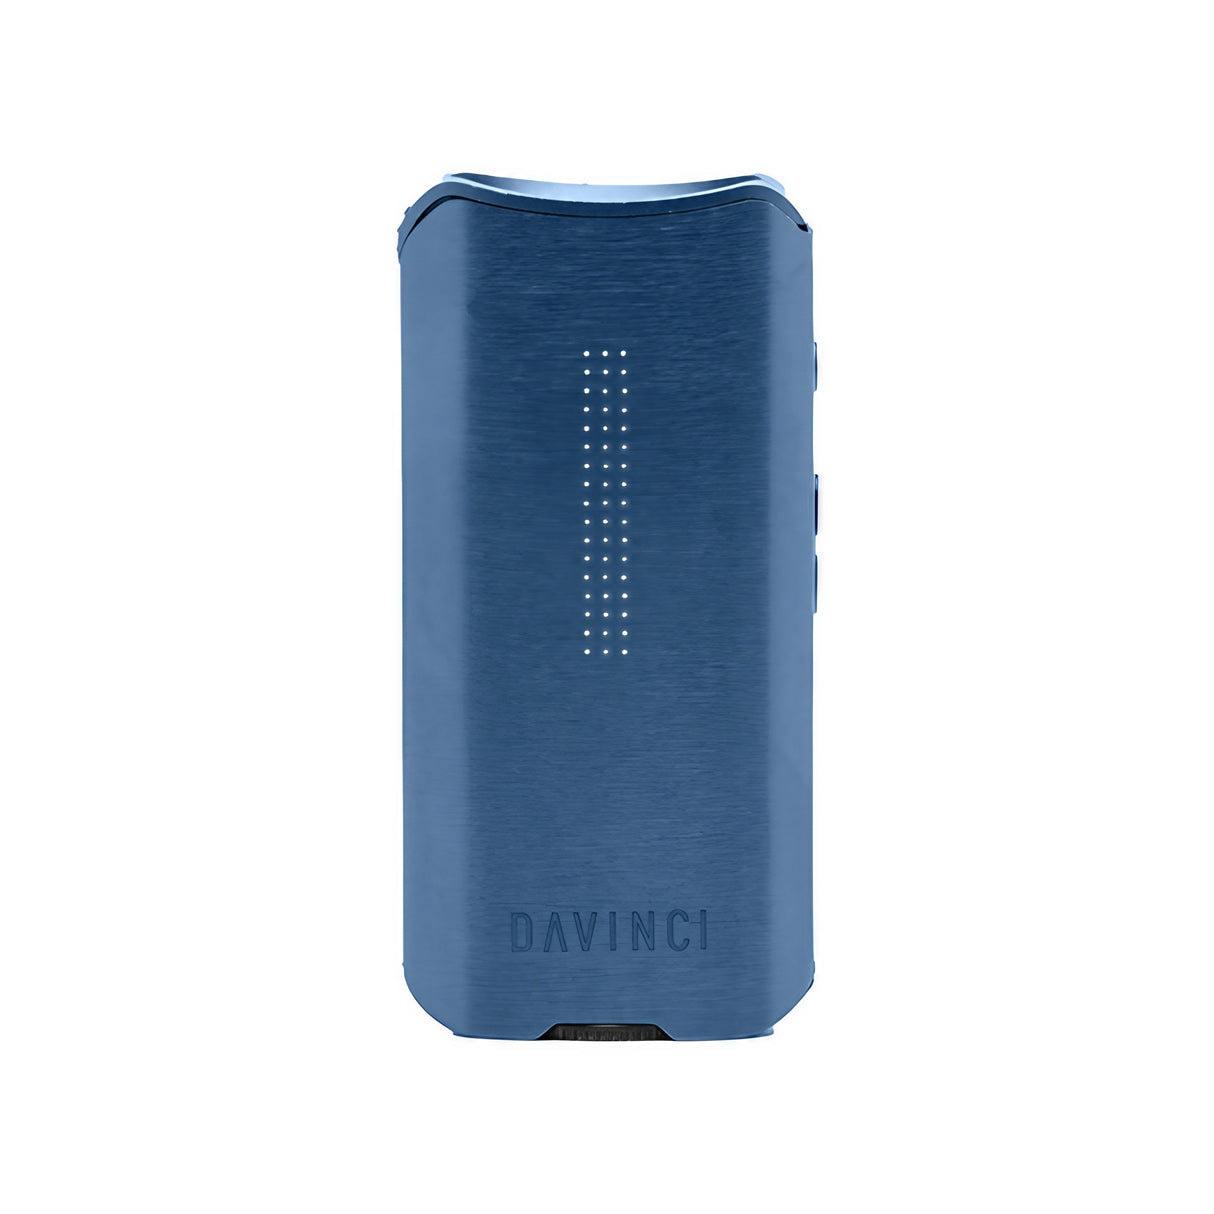 DaVinci IQ2 Vaporizer in blue, front view, portable design for dry herbs and concentrates